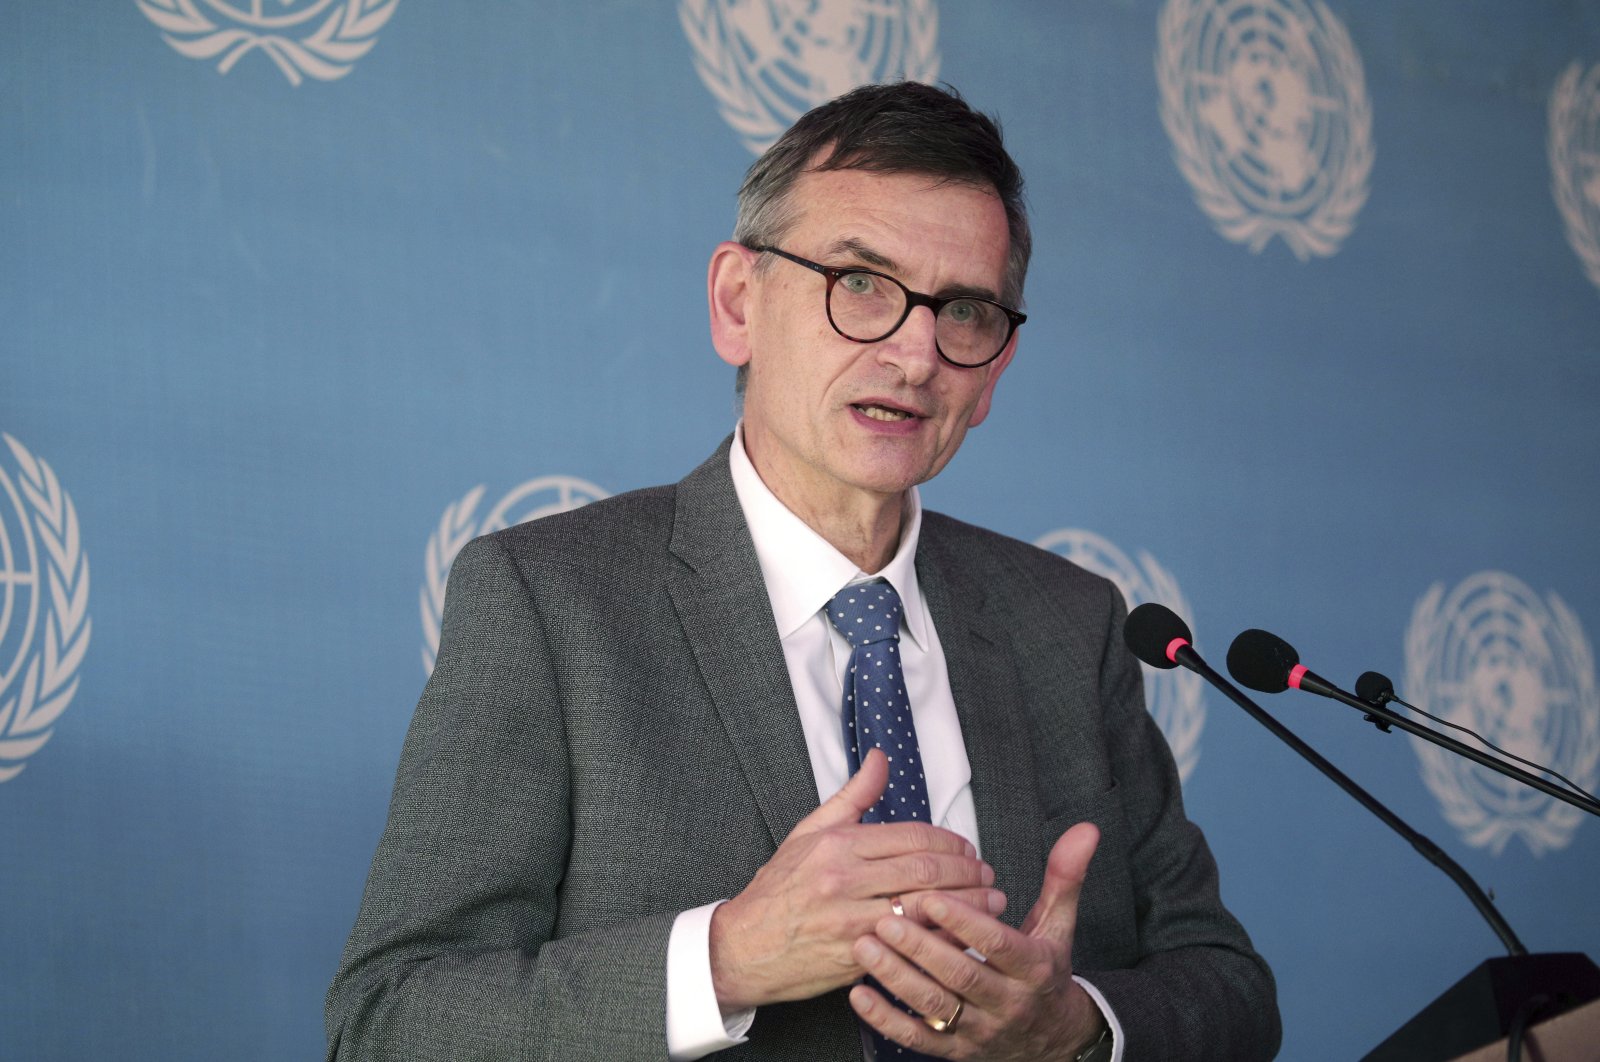 Volker Perthes, the U.N. envoy for Sudan, speaks during a conference in Khartoum, Sudan, Jan. 10, 2022. Perthes said talks would seek a &quot;sustainable path forward towards democracy and peace&quot; in the country. (AP Photo)